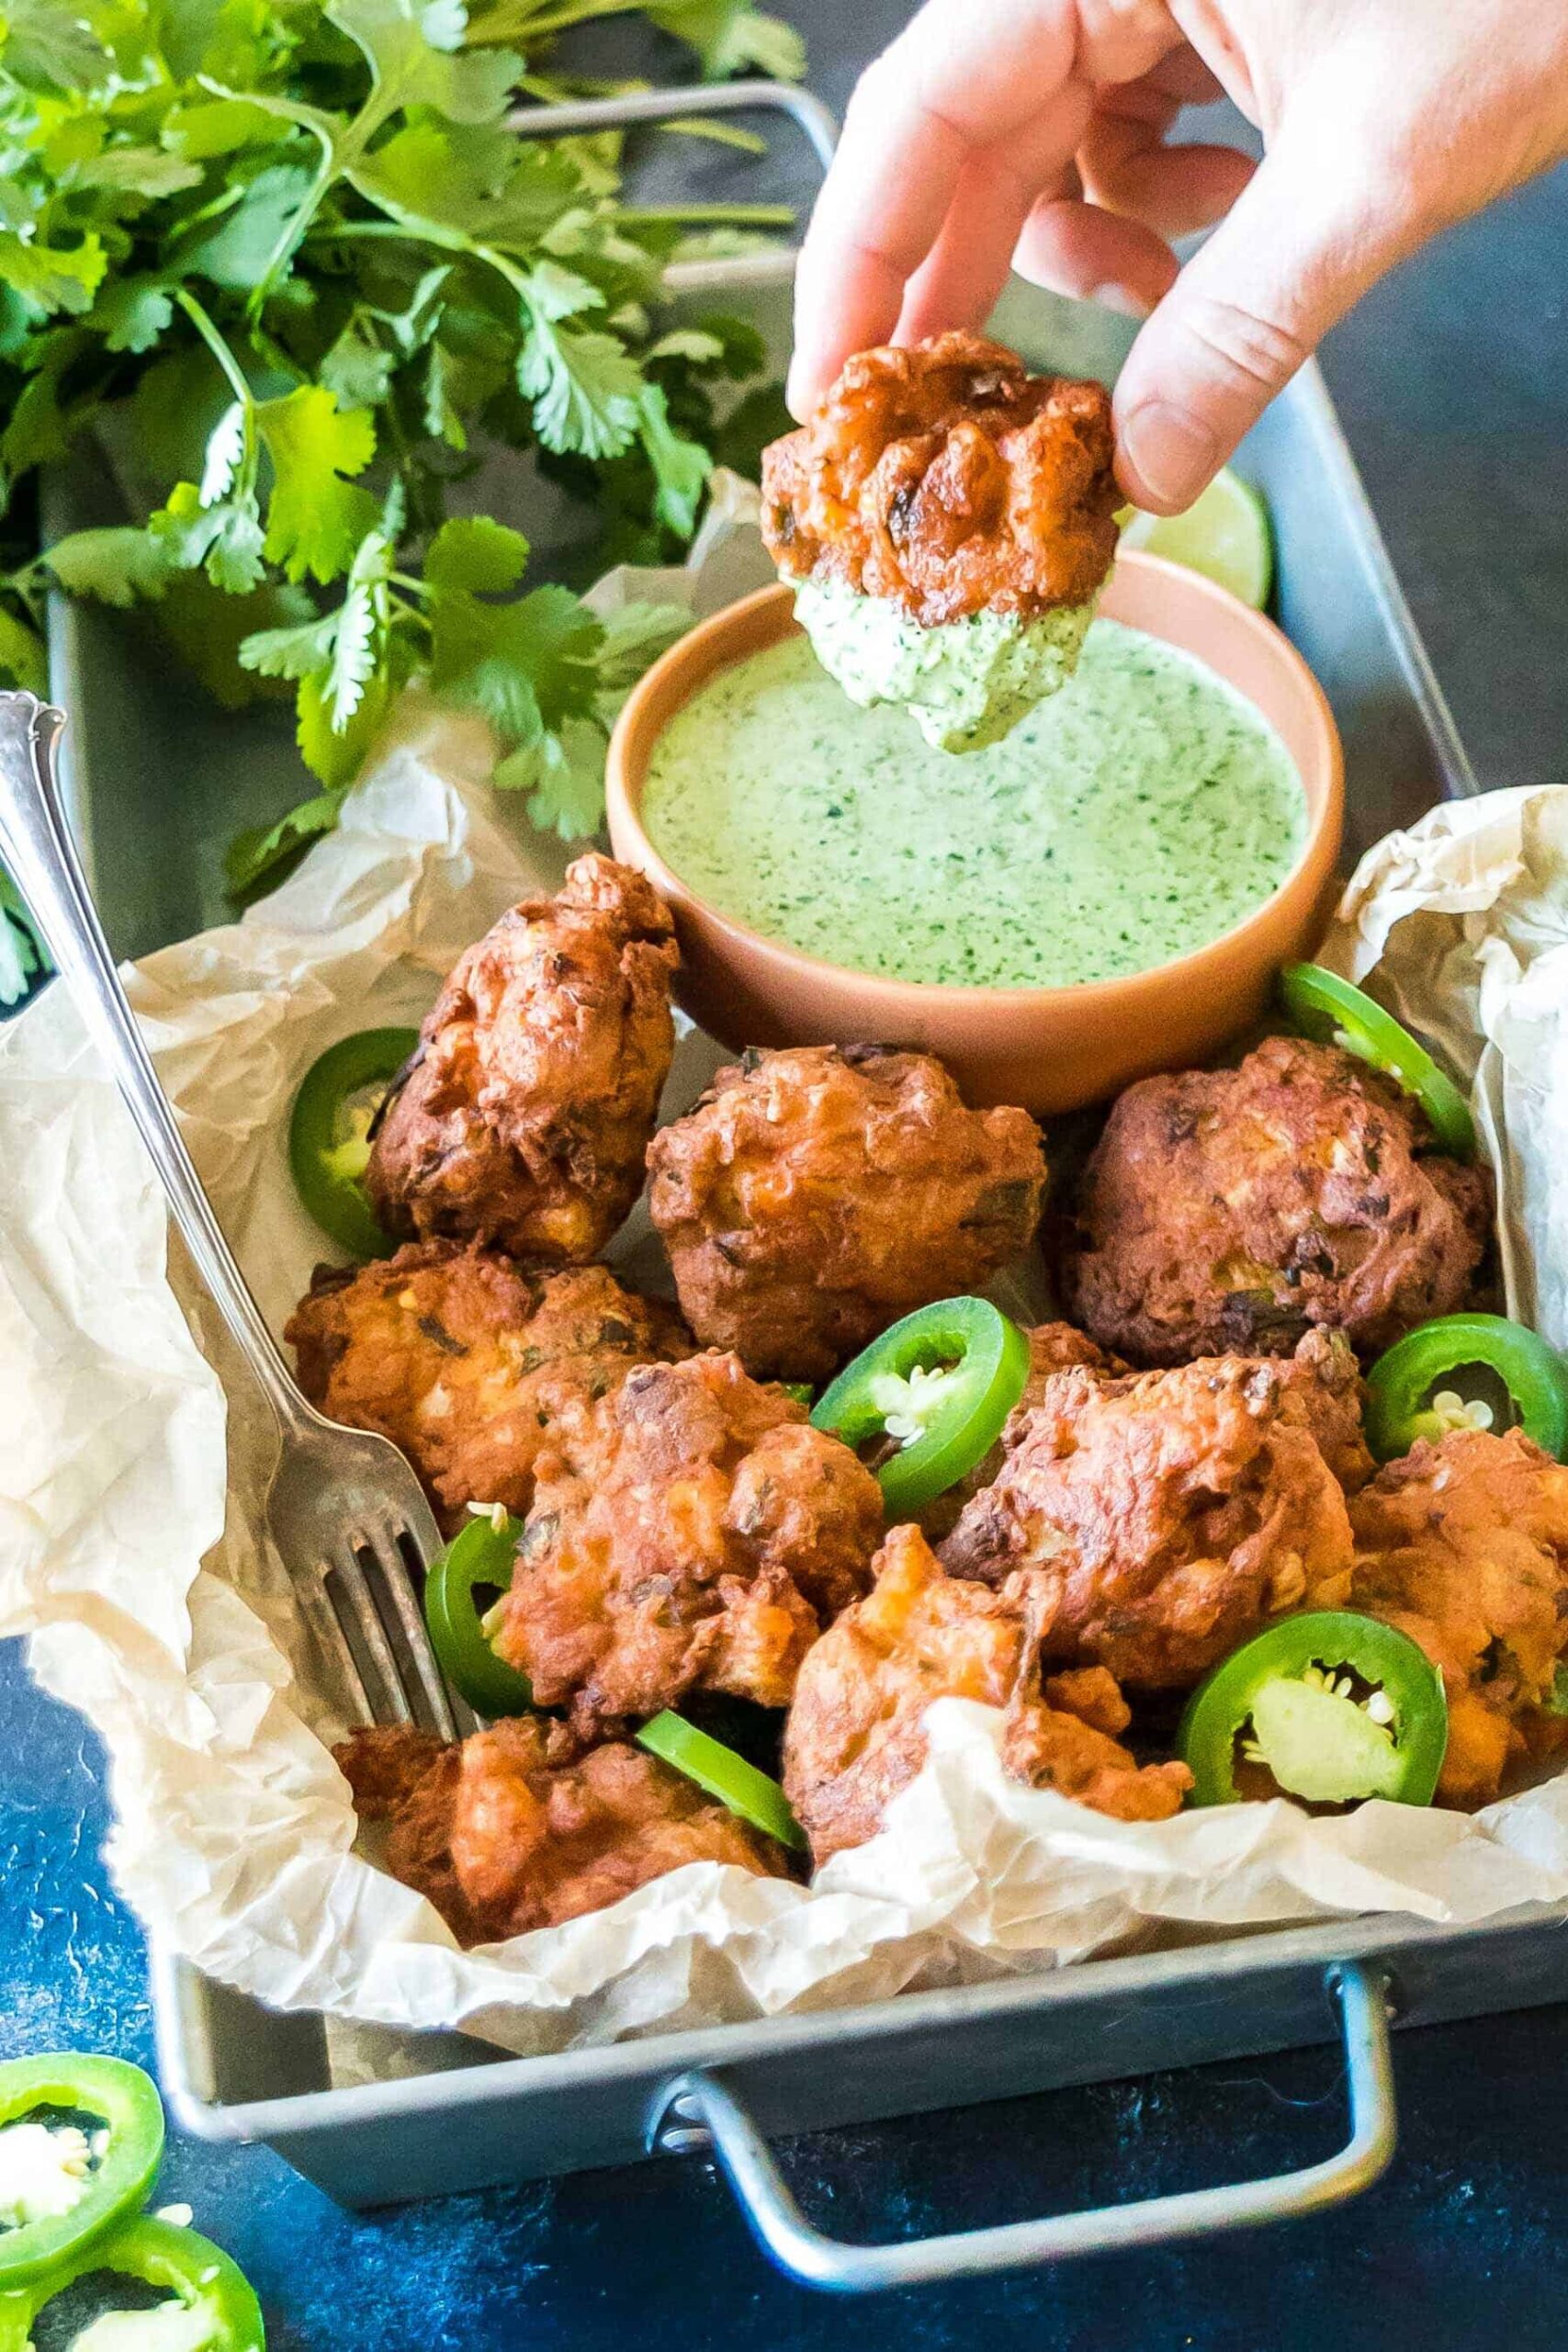 Keto Jalapeño Shrimp Hushpuppies on a tray, one hushpuppy is being dipped into the jalapeno sauce